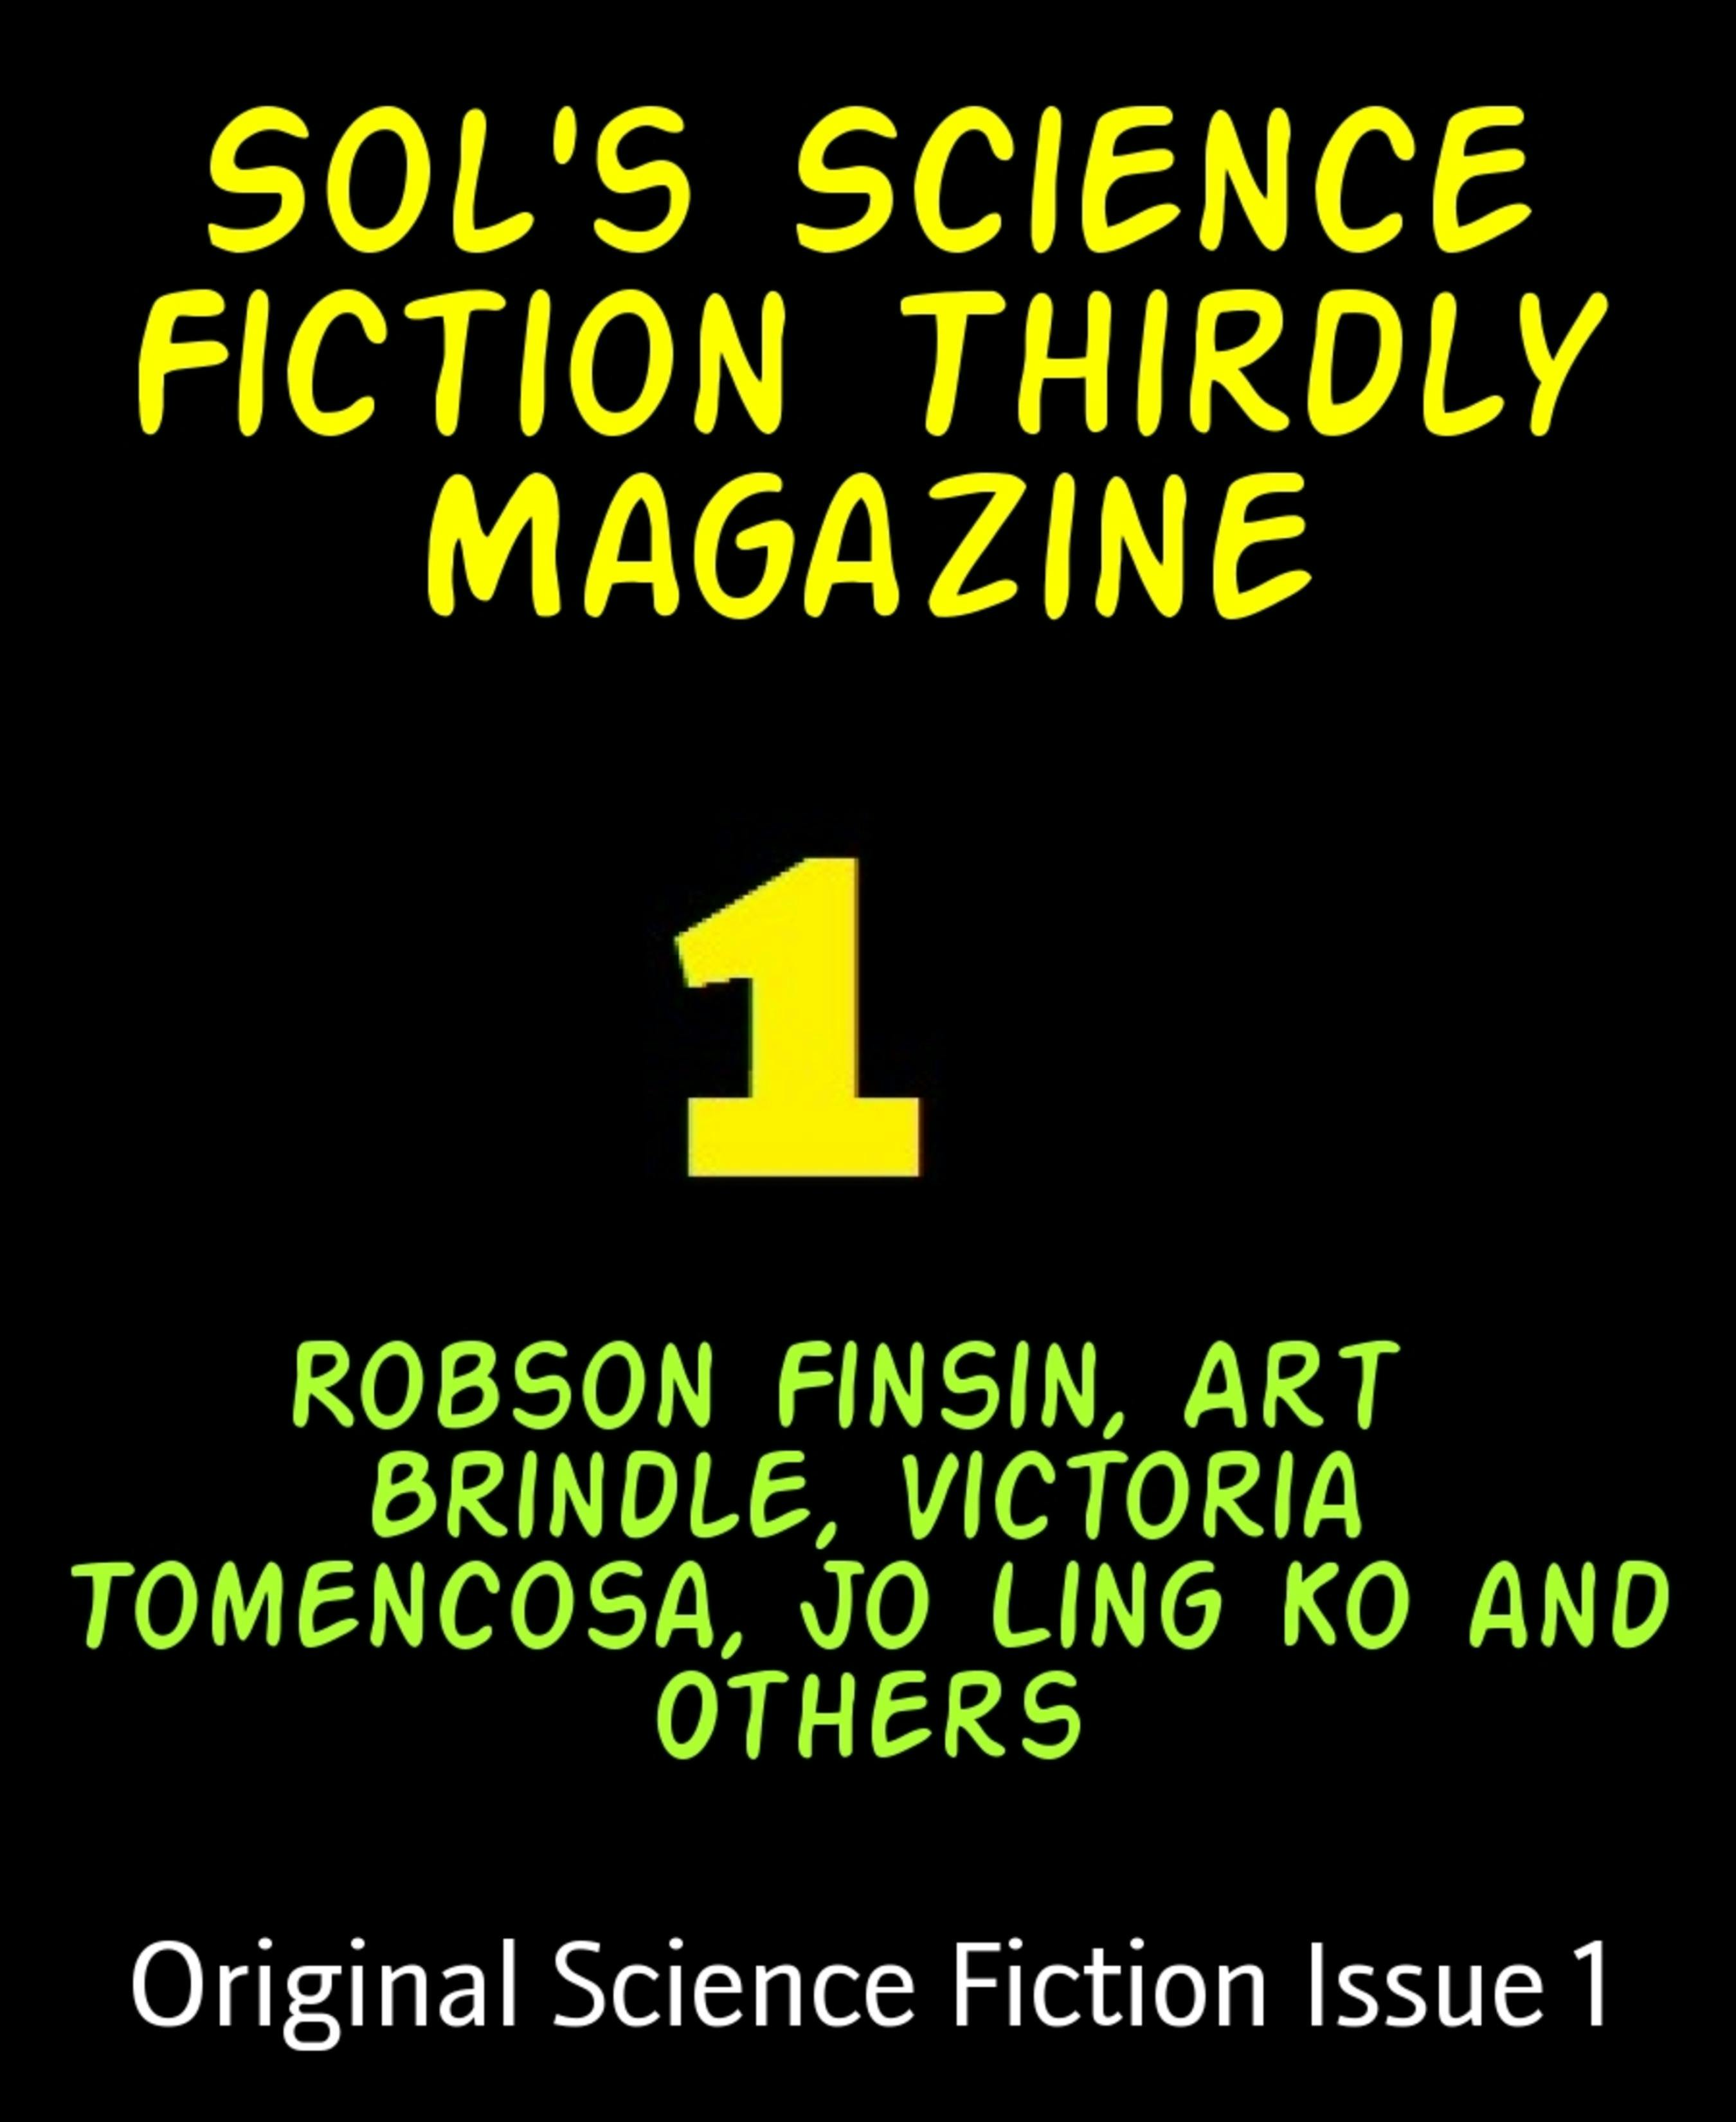 Sol's Science Fiction Thirdly Magazine: Original Science Fiction Issue 1 - Art Brindle, Victoria Tomencosa, Jo Ling Ko and Others, Robson Finsin